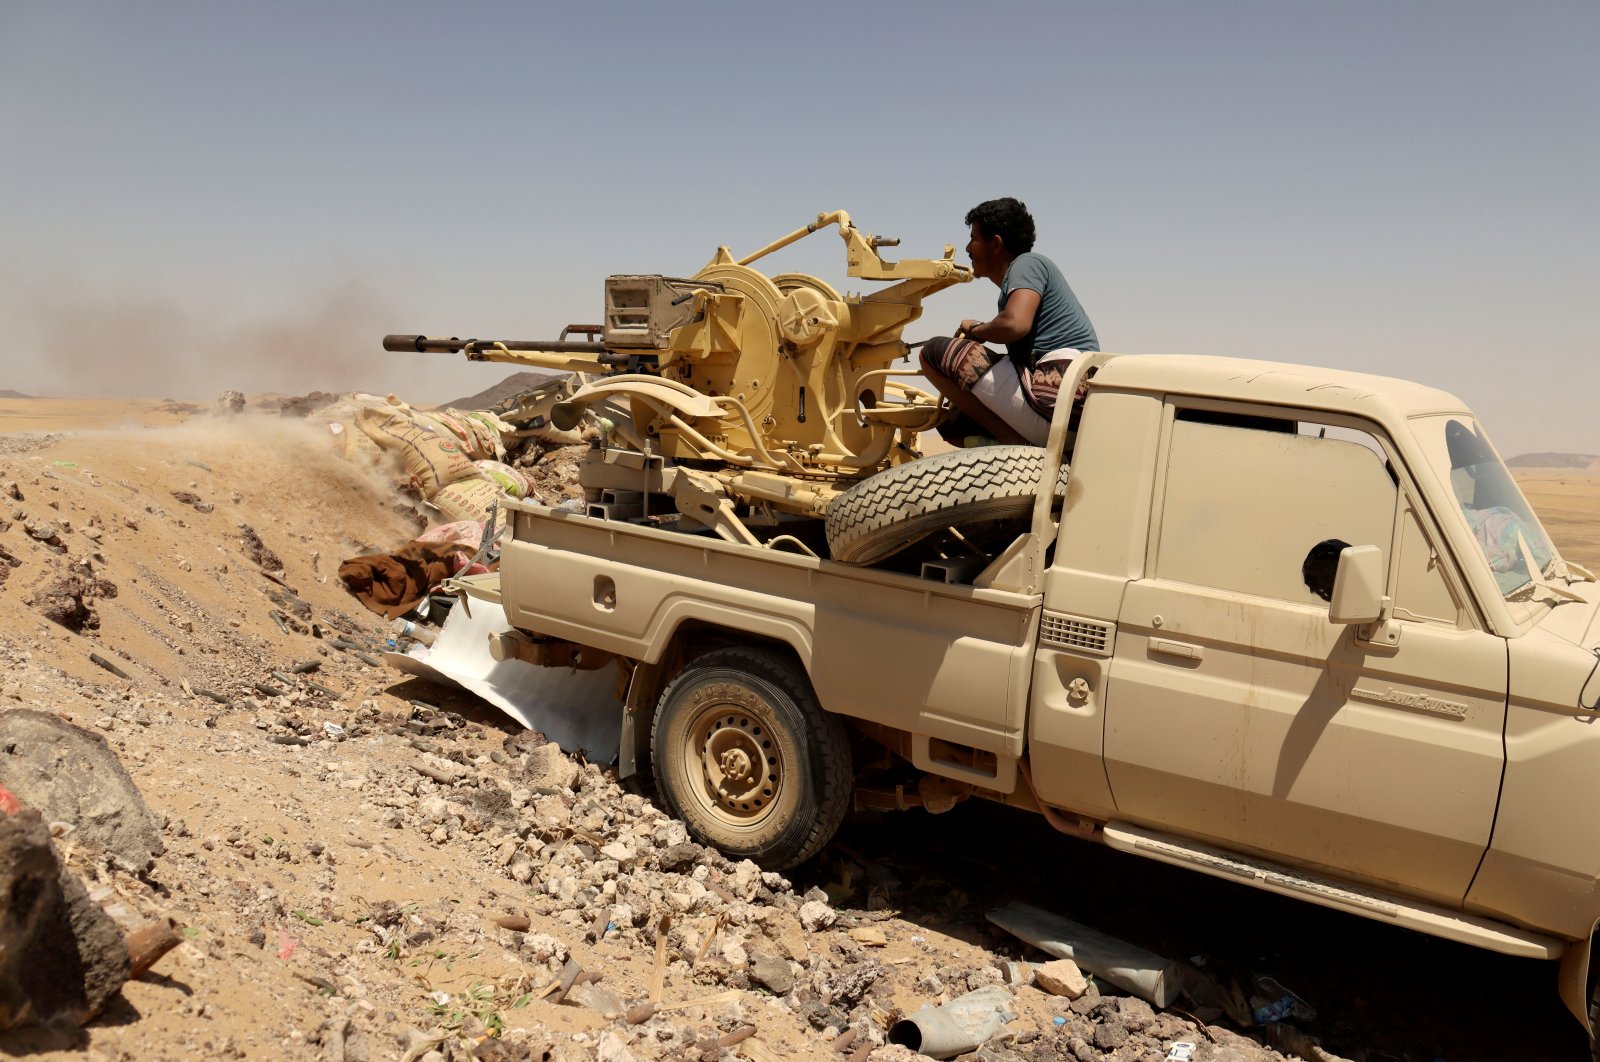 A Yemeni government fighter fires a vehicle-mounted weapon at a frontline position during fighting against Houthi fighters in Marib, Yemen, March 28, 2021. (Reuters Photo)